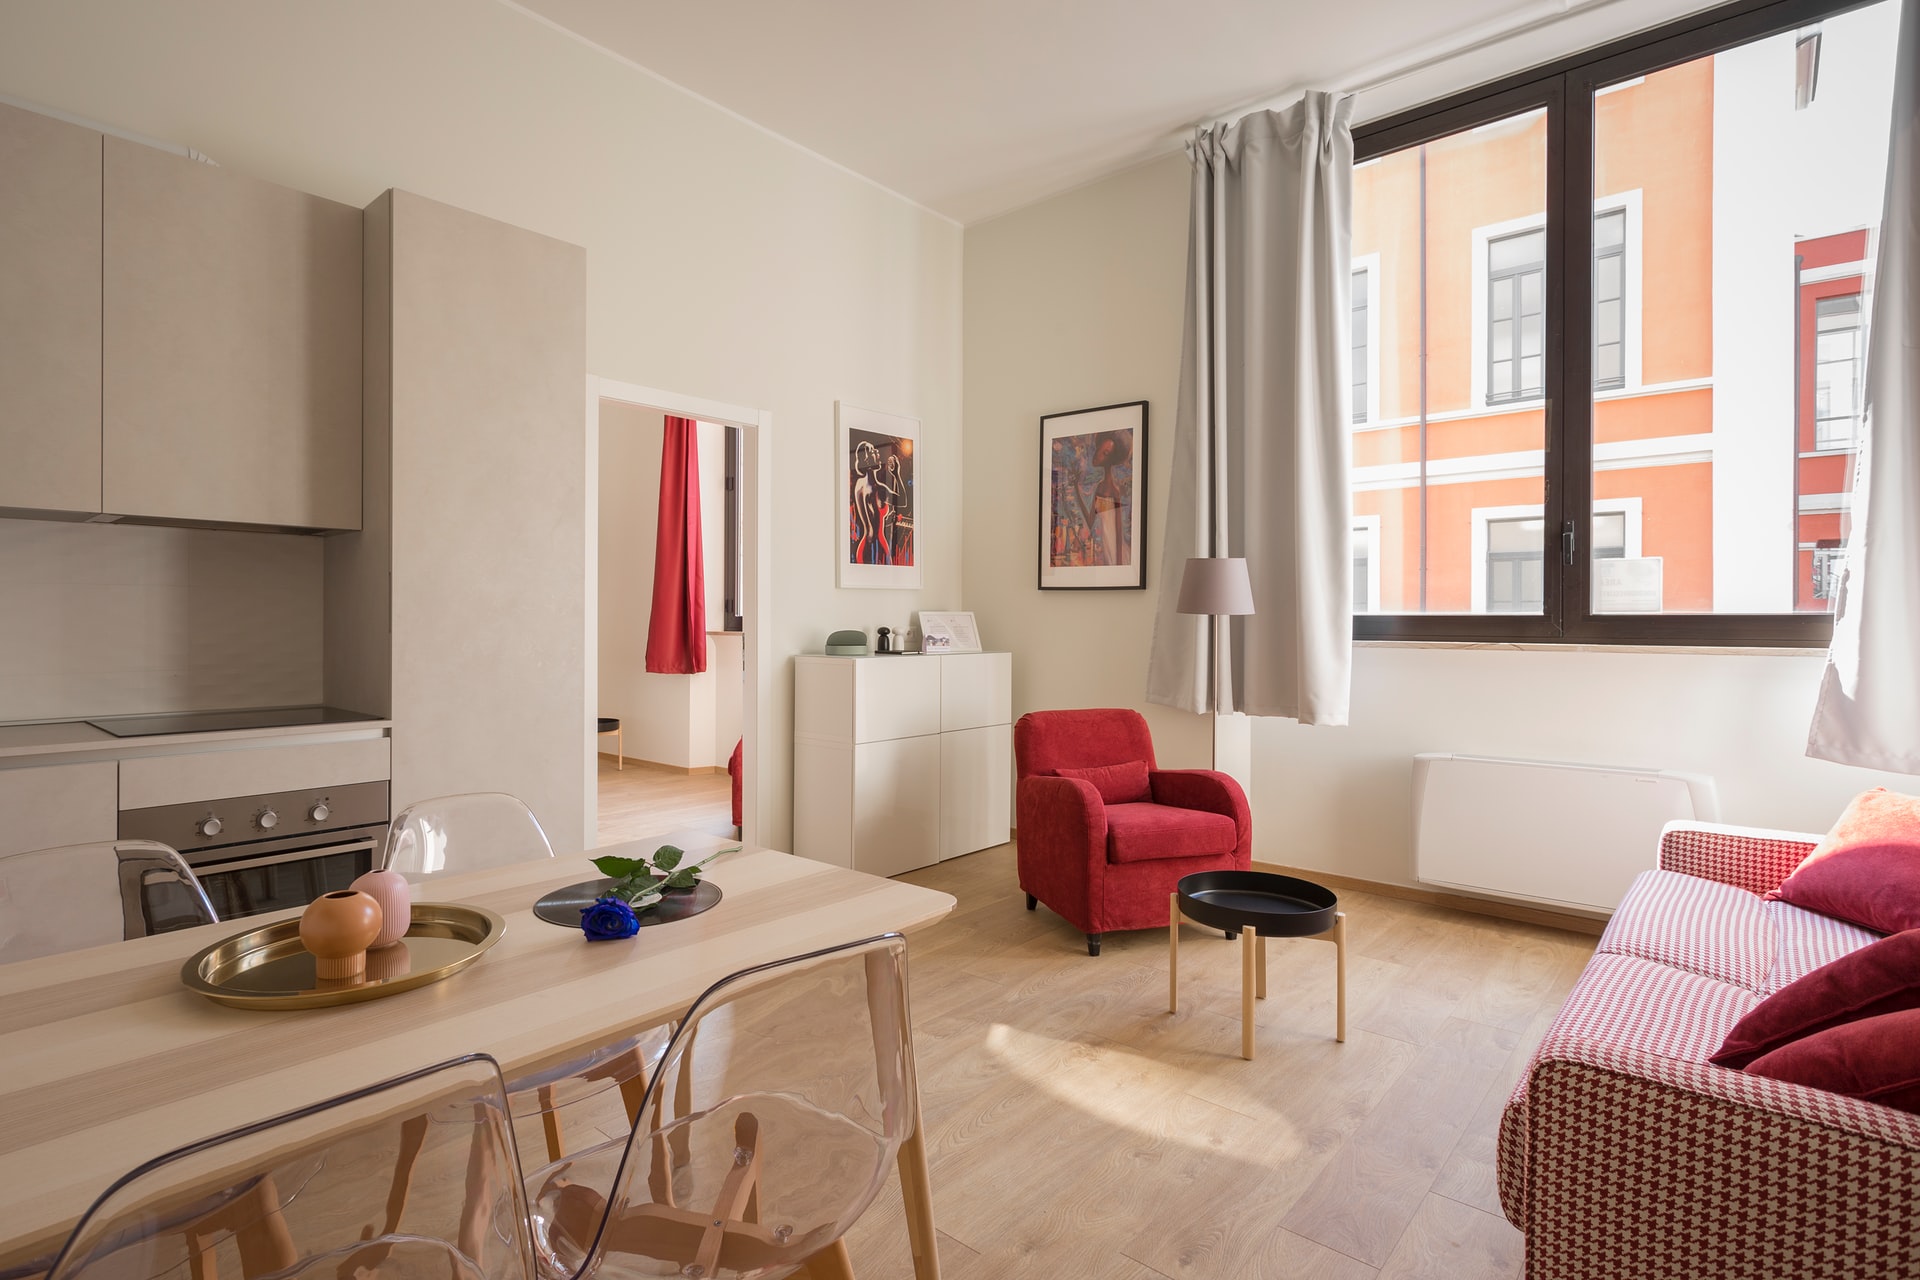 What to Look for In Your Next Apartment